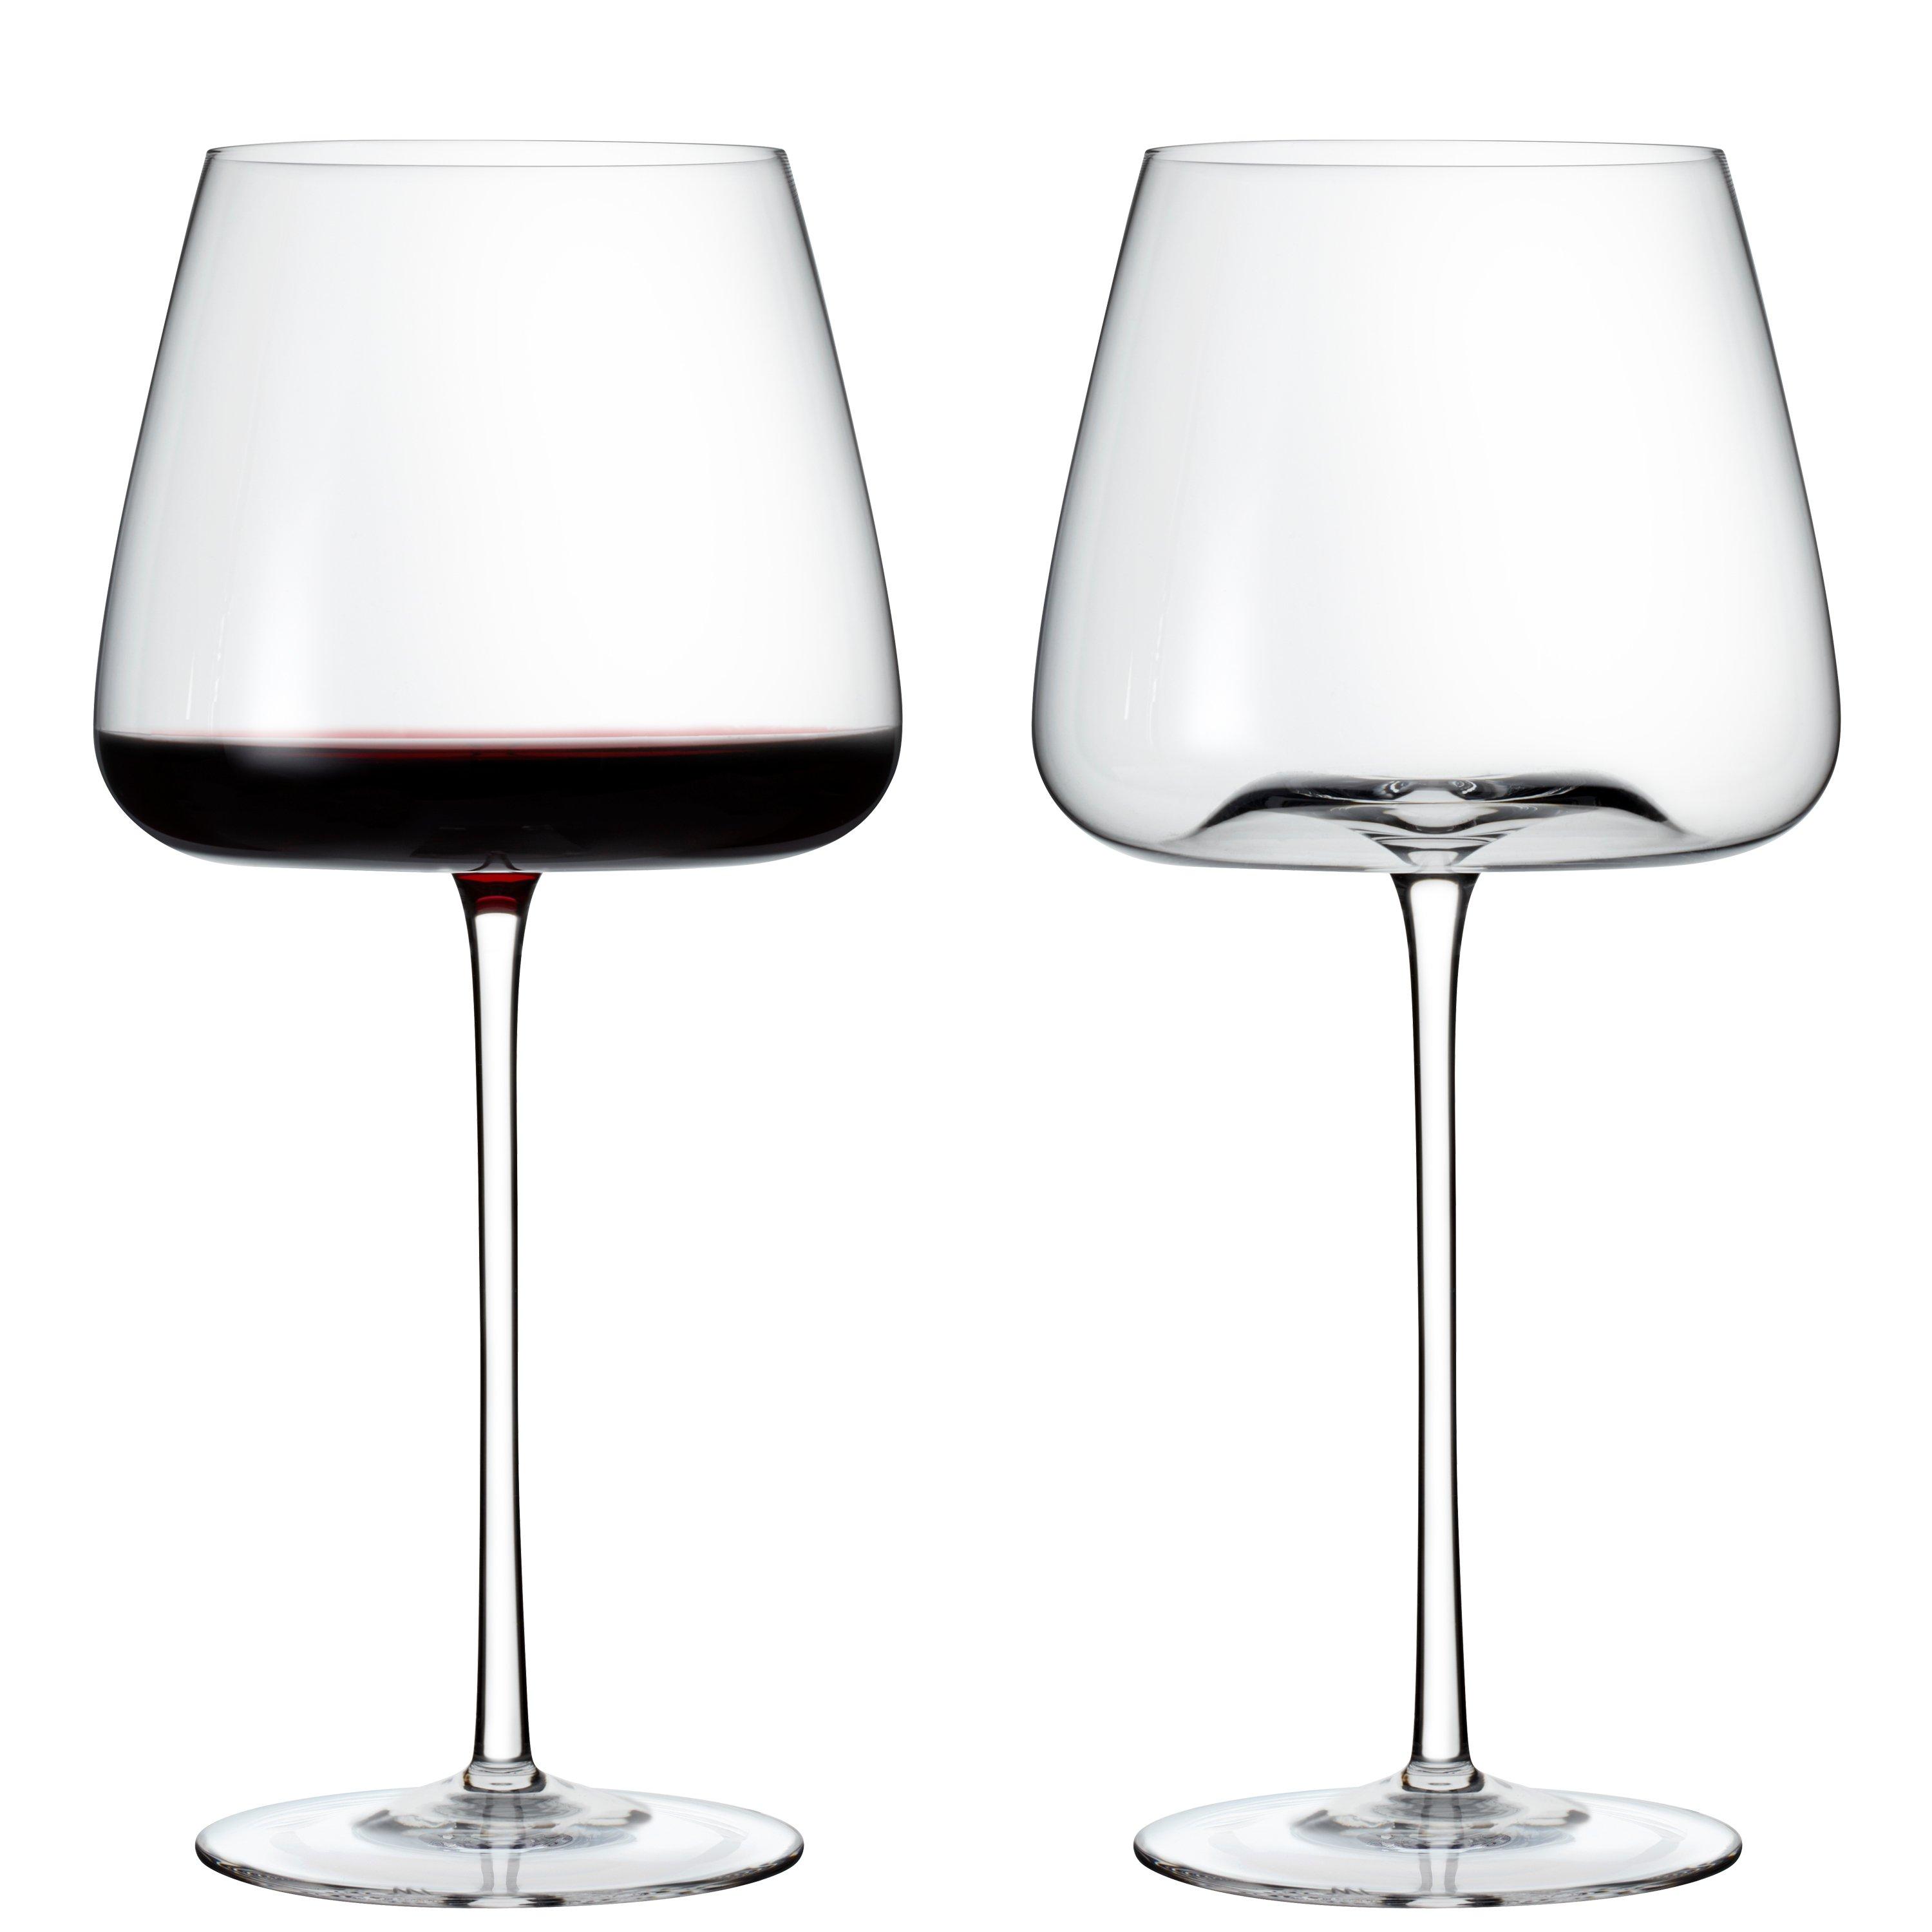 Crystal Wine Glasses (set of 2) - GO HOME Unusual Decor and Gifts